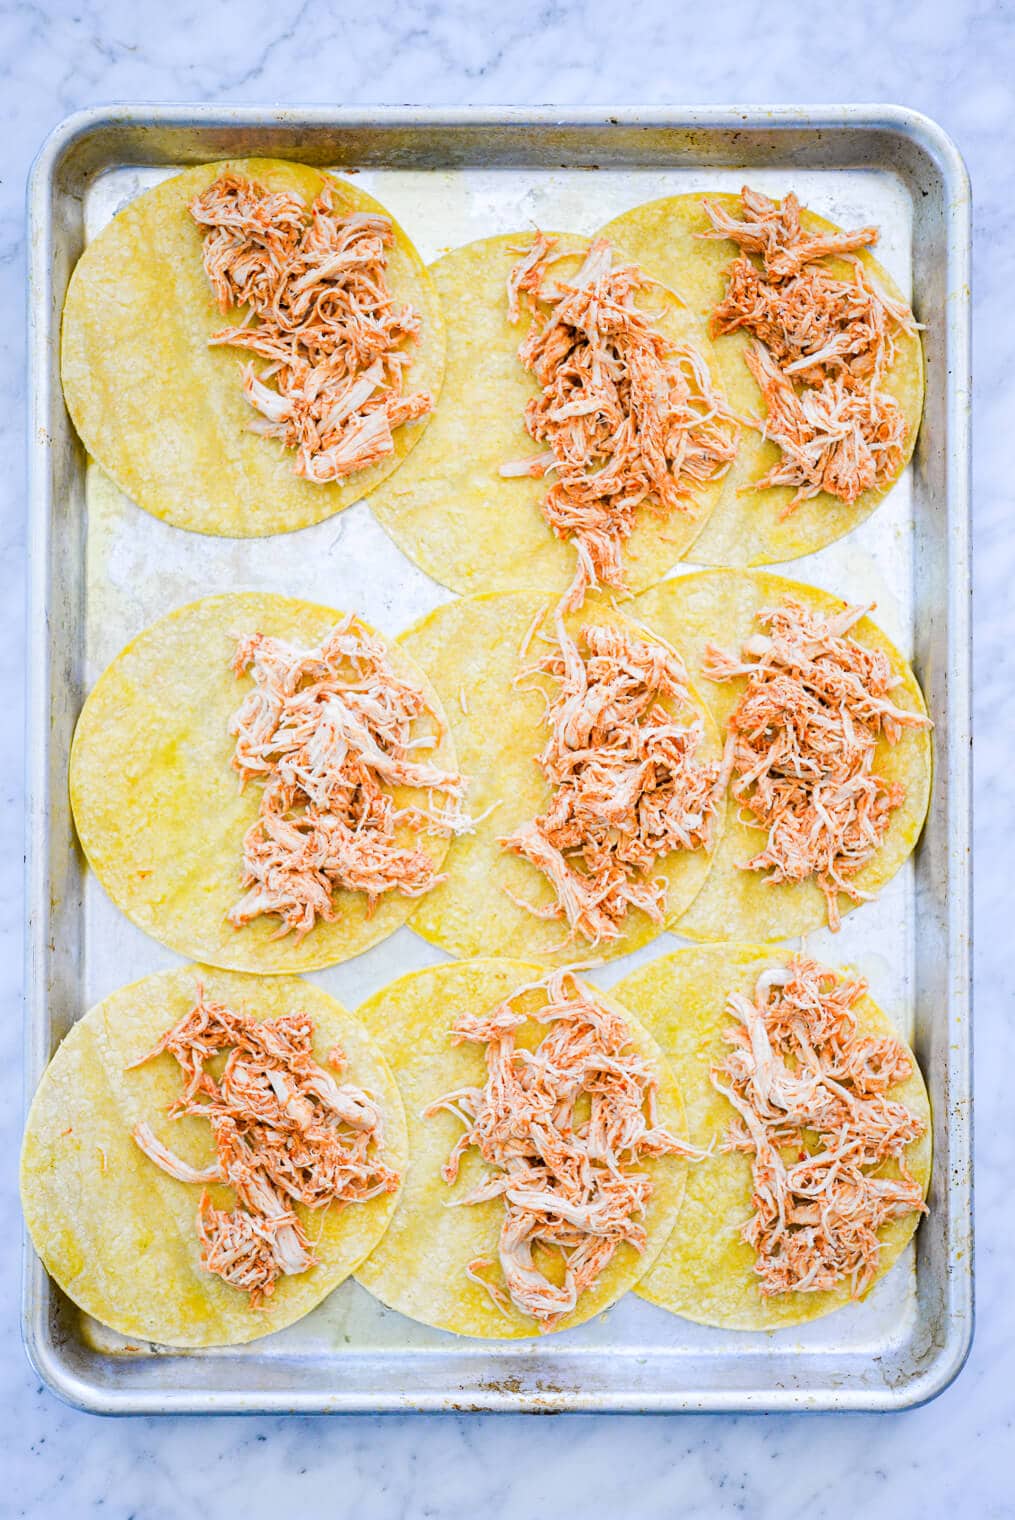 Sheet pan with three rows of three corn tortillas. Each tortilla is topped on one half side with shredded chicken.